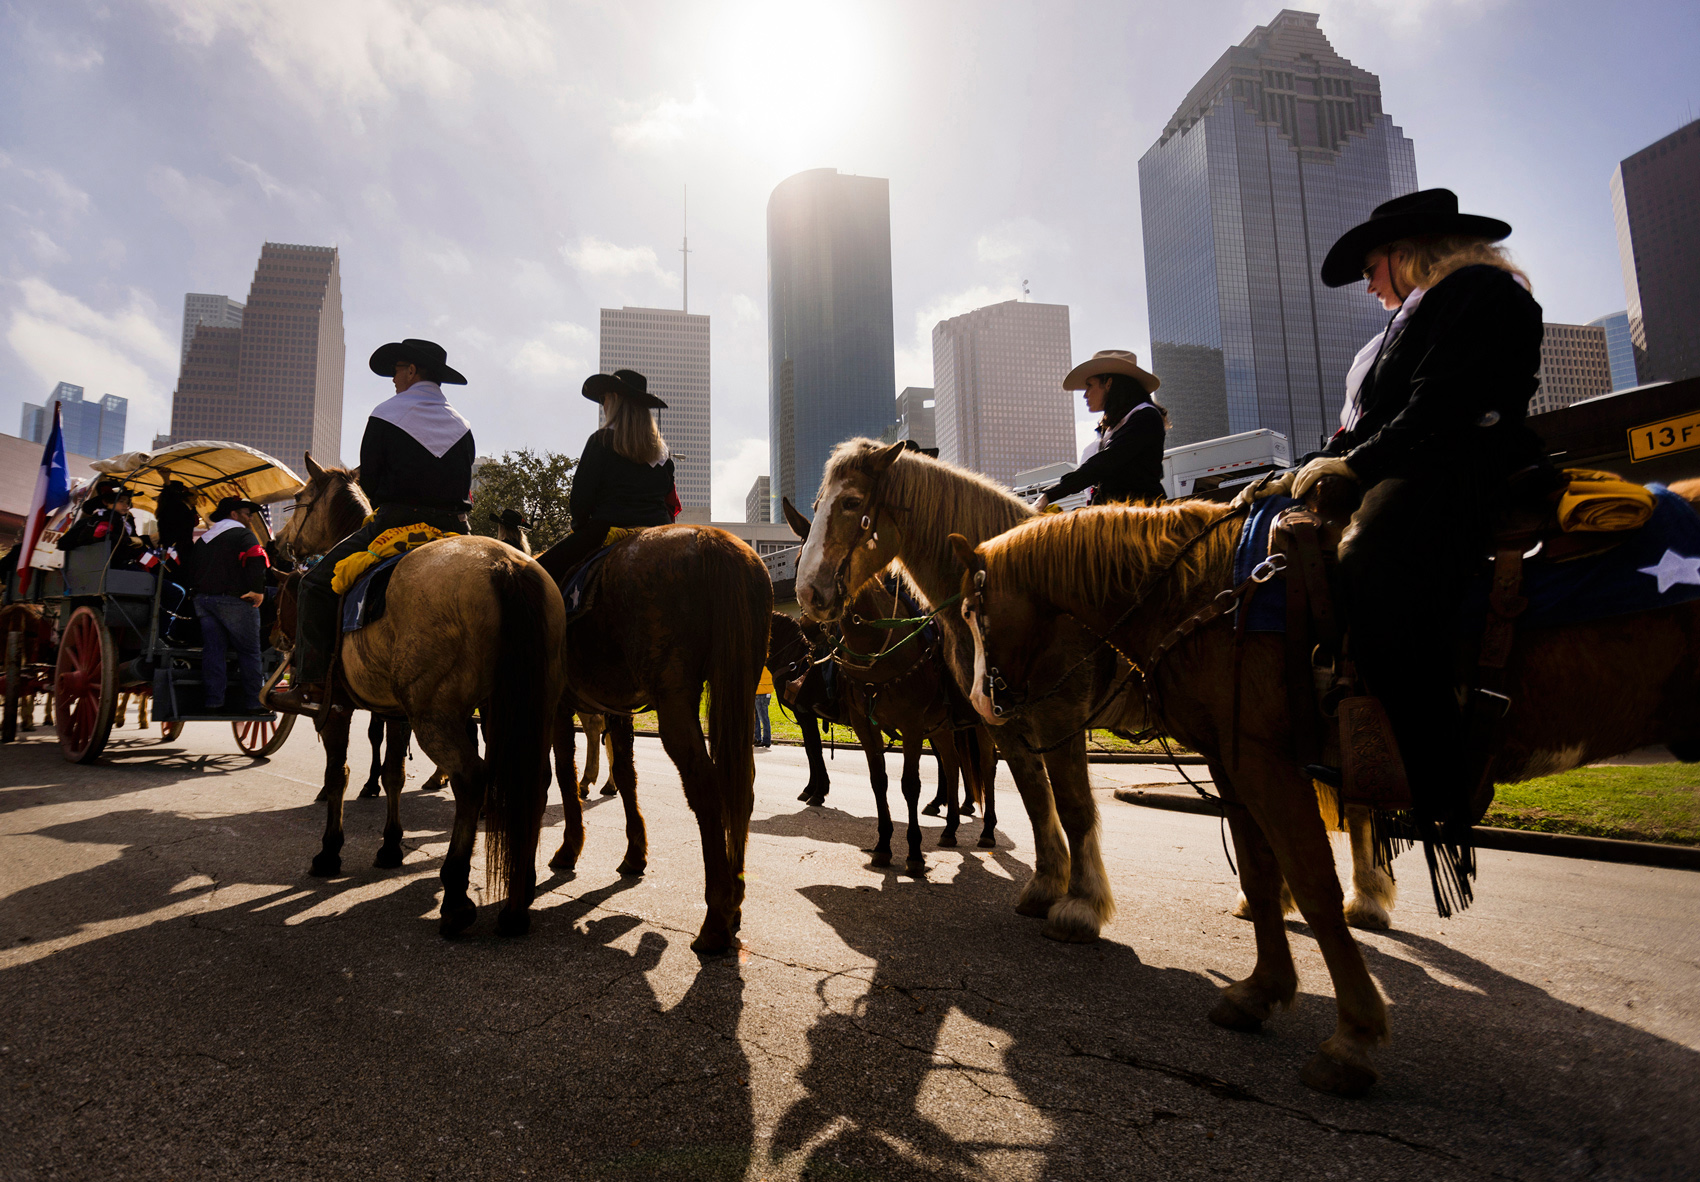 Salt Grass Trail Ride members wait for their turn to participate in the Houston Rodeo and Livestock Parade, Saturday, Feb. 25, 2023, in Houston.